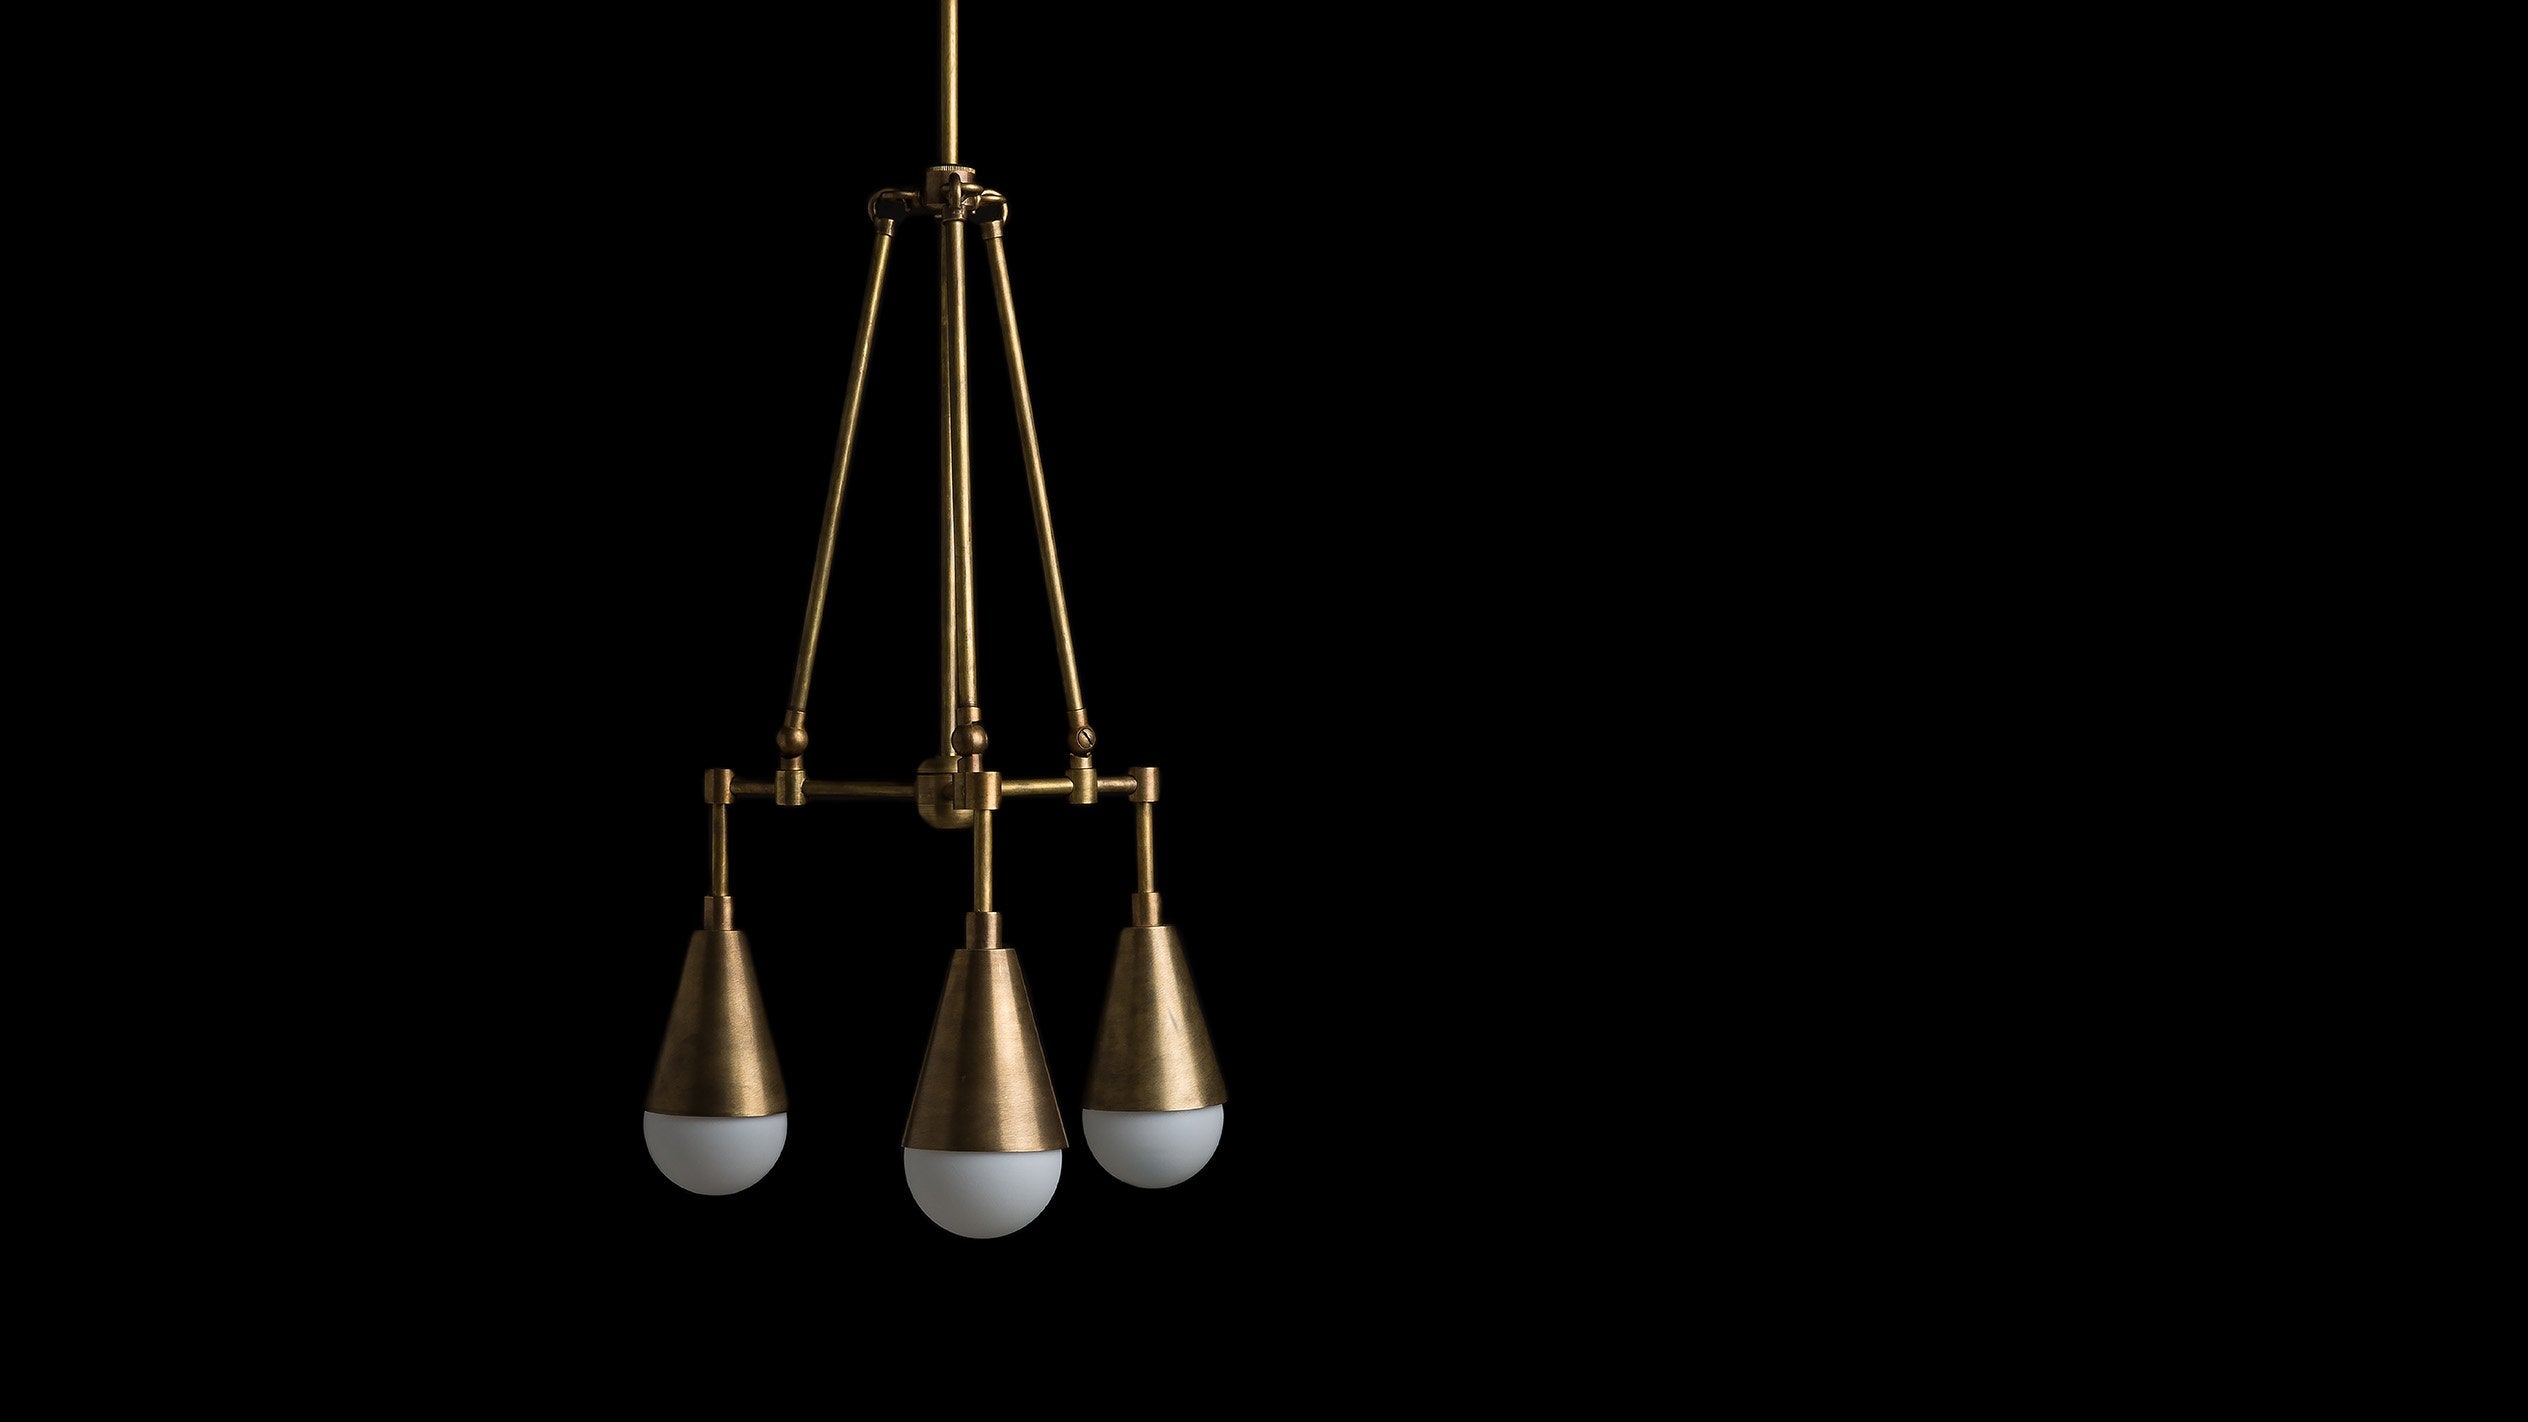 TRIAD : 3 ceiling pendant in Aged Brass finish, hanging against a black background. 